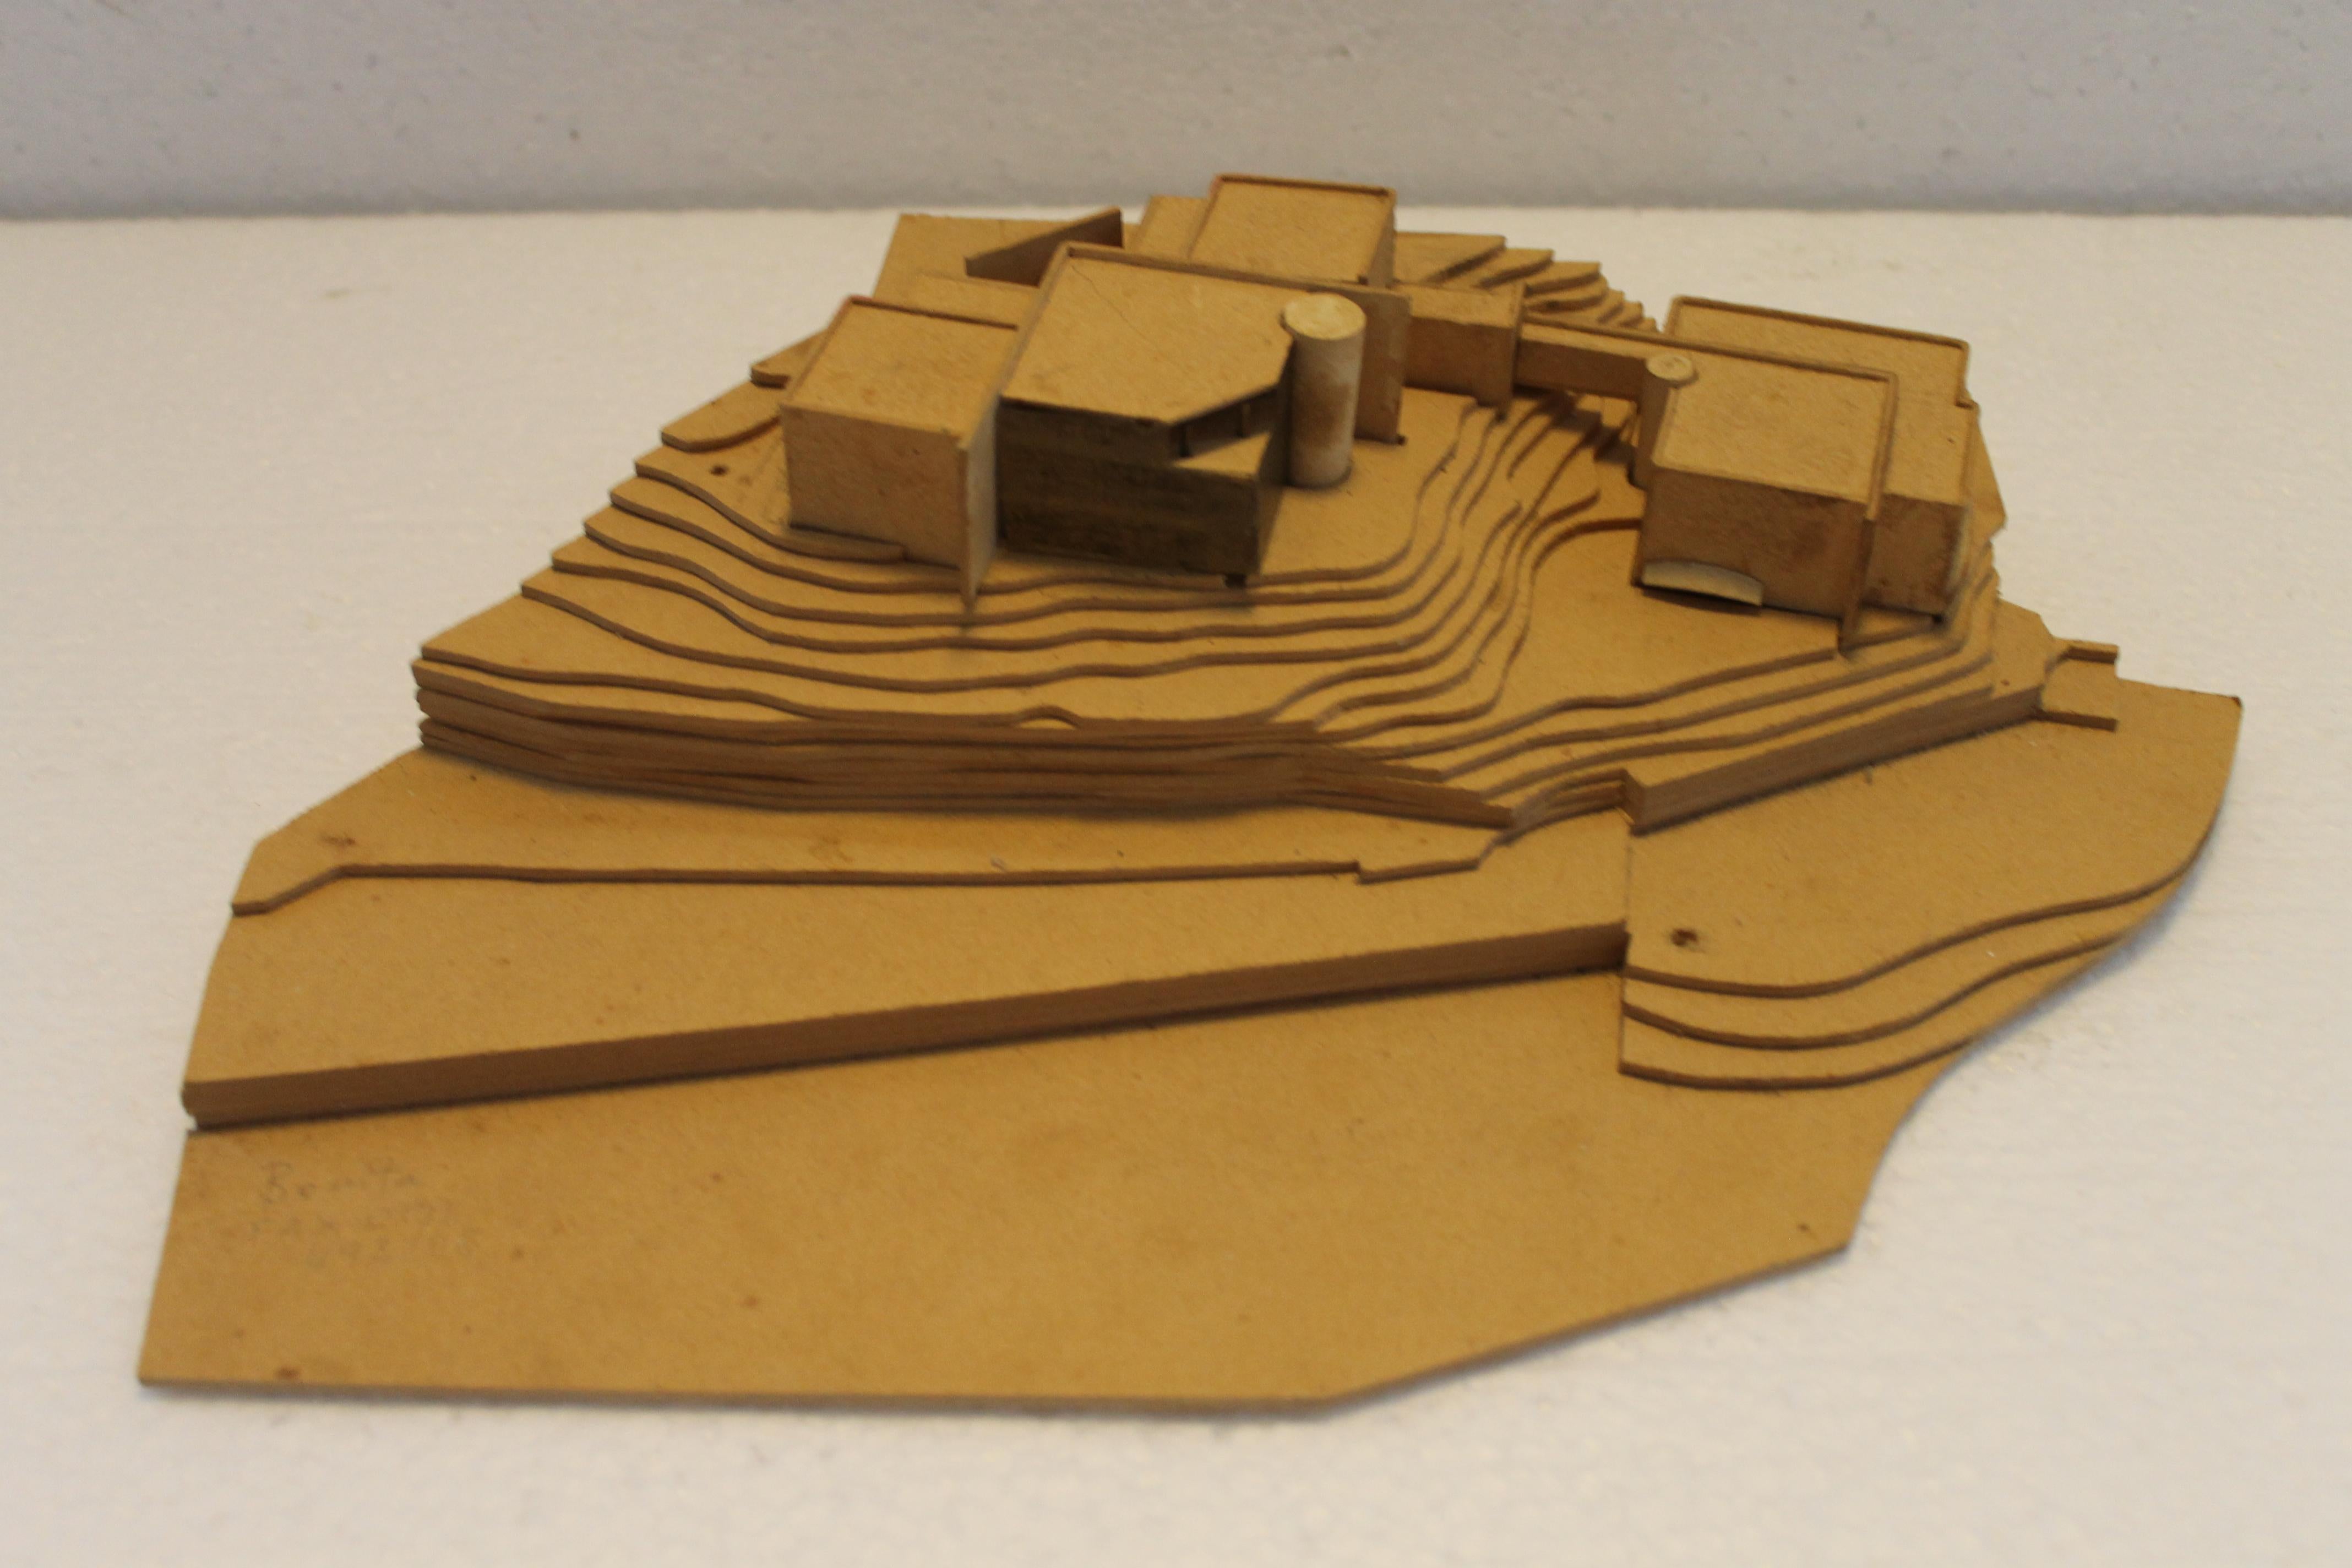 Italian Afra and Tobia Scarpa Model 'Maquette' of Aobadai House, Tokyo 'Japan' 1995 For Sale